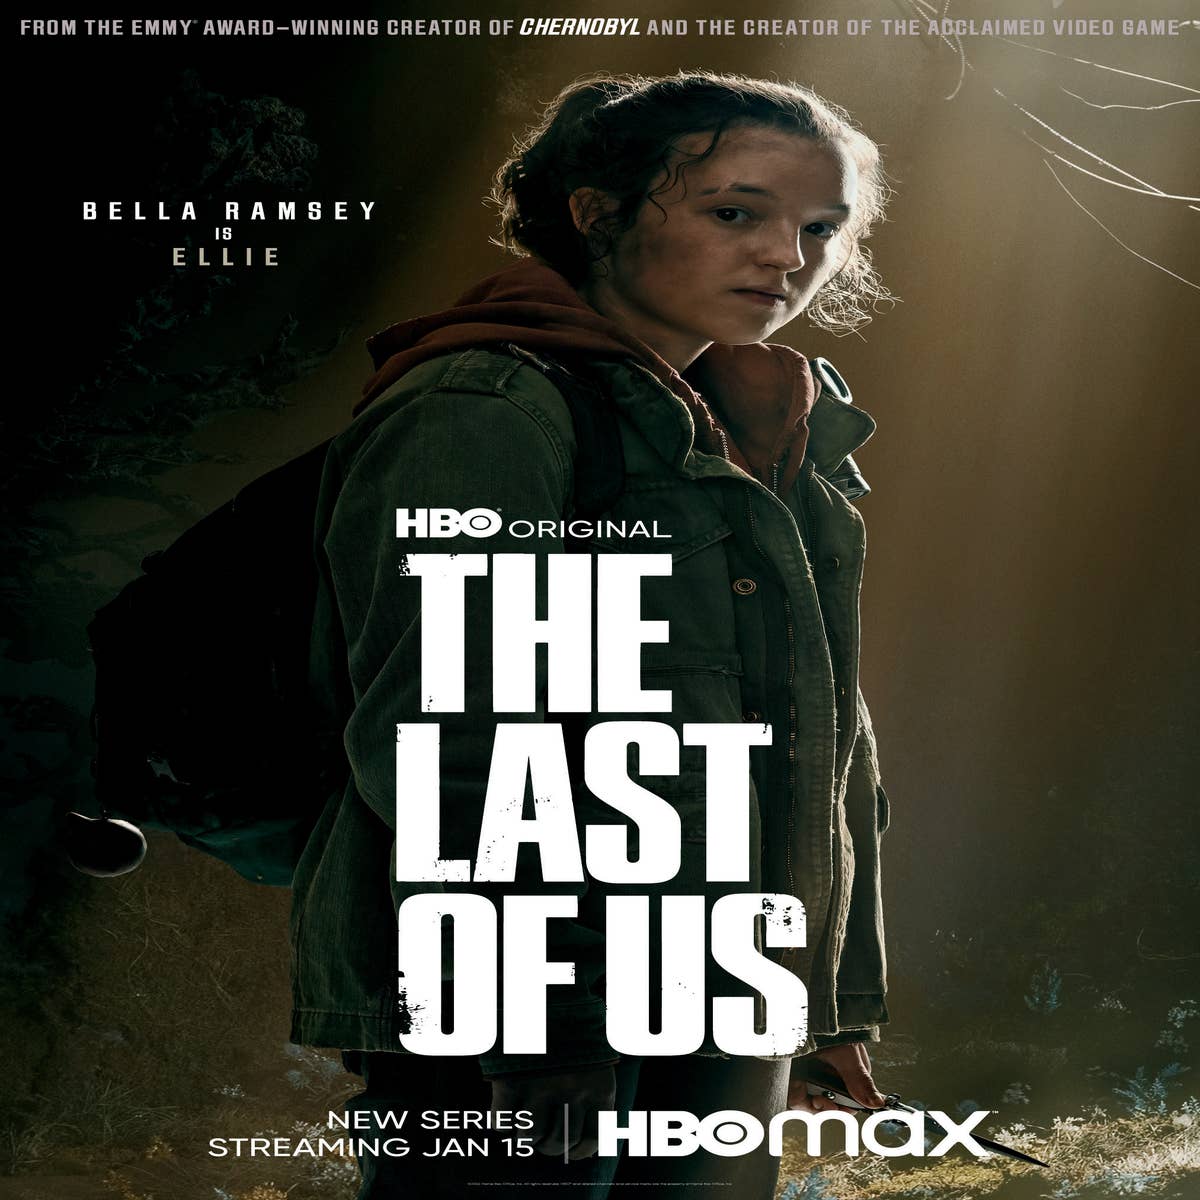 I was wrong about HBO's The Last of Us